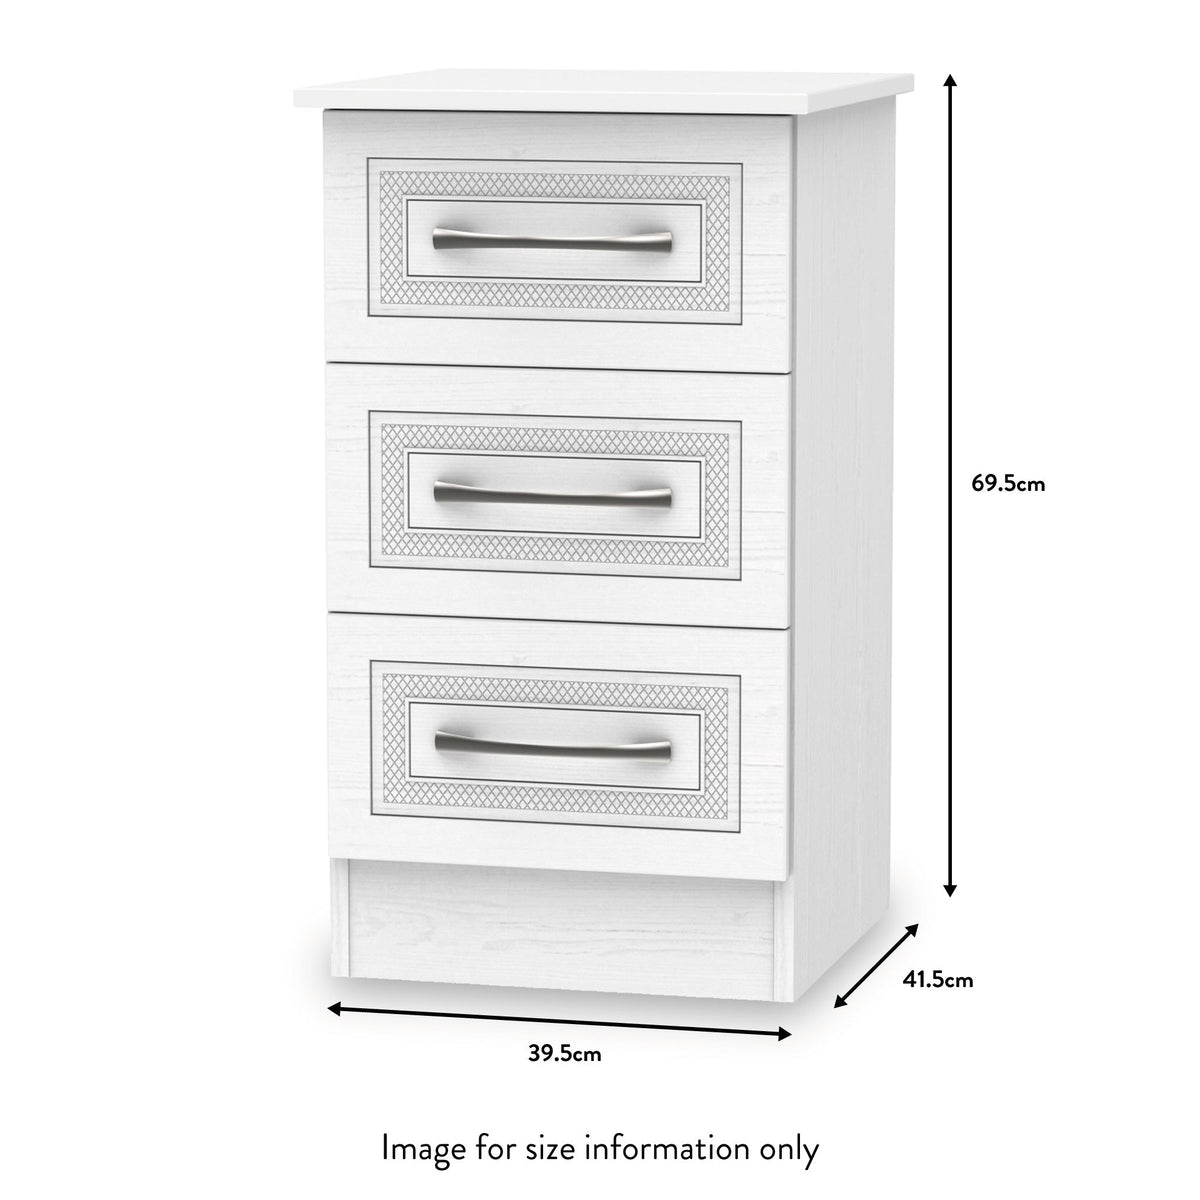 Killgarth White Wireless Charging 3 Drawer Bedside Table dimensions